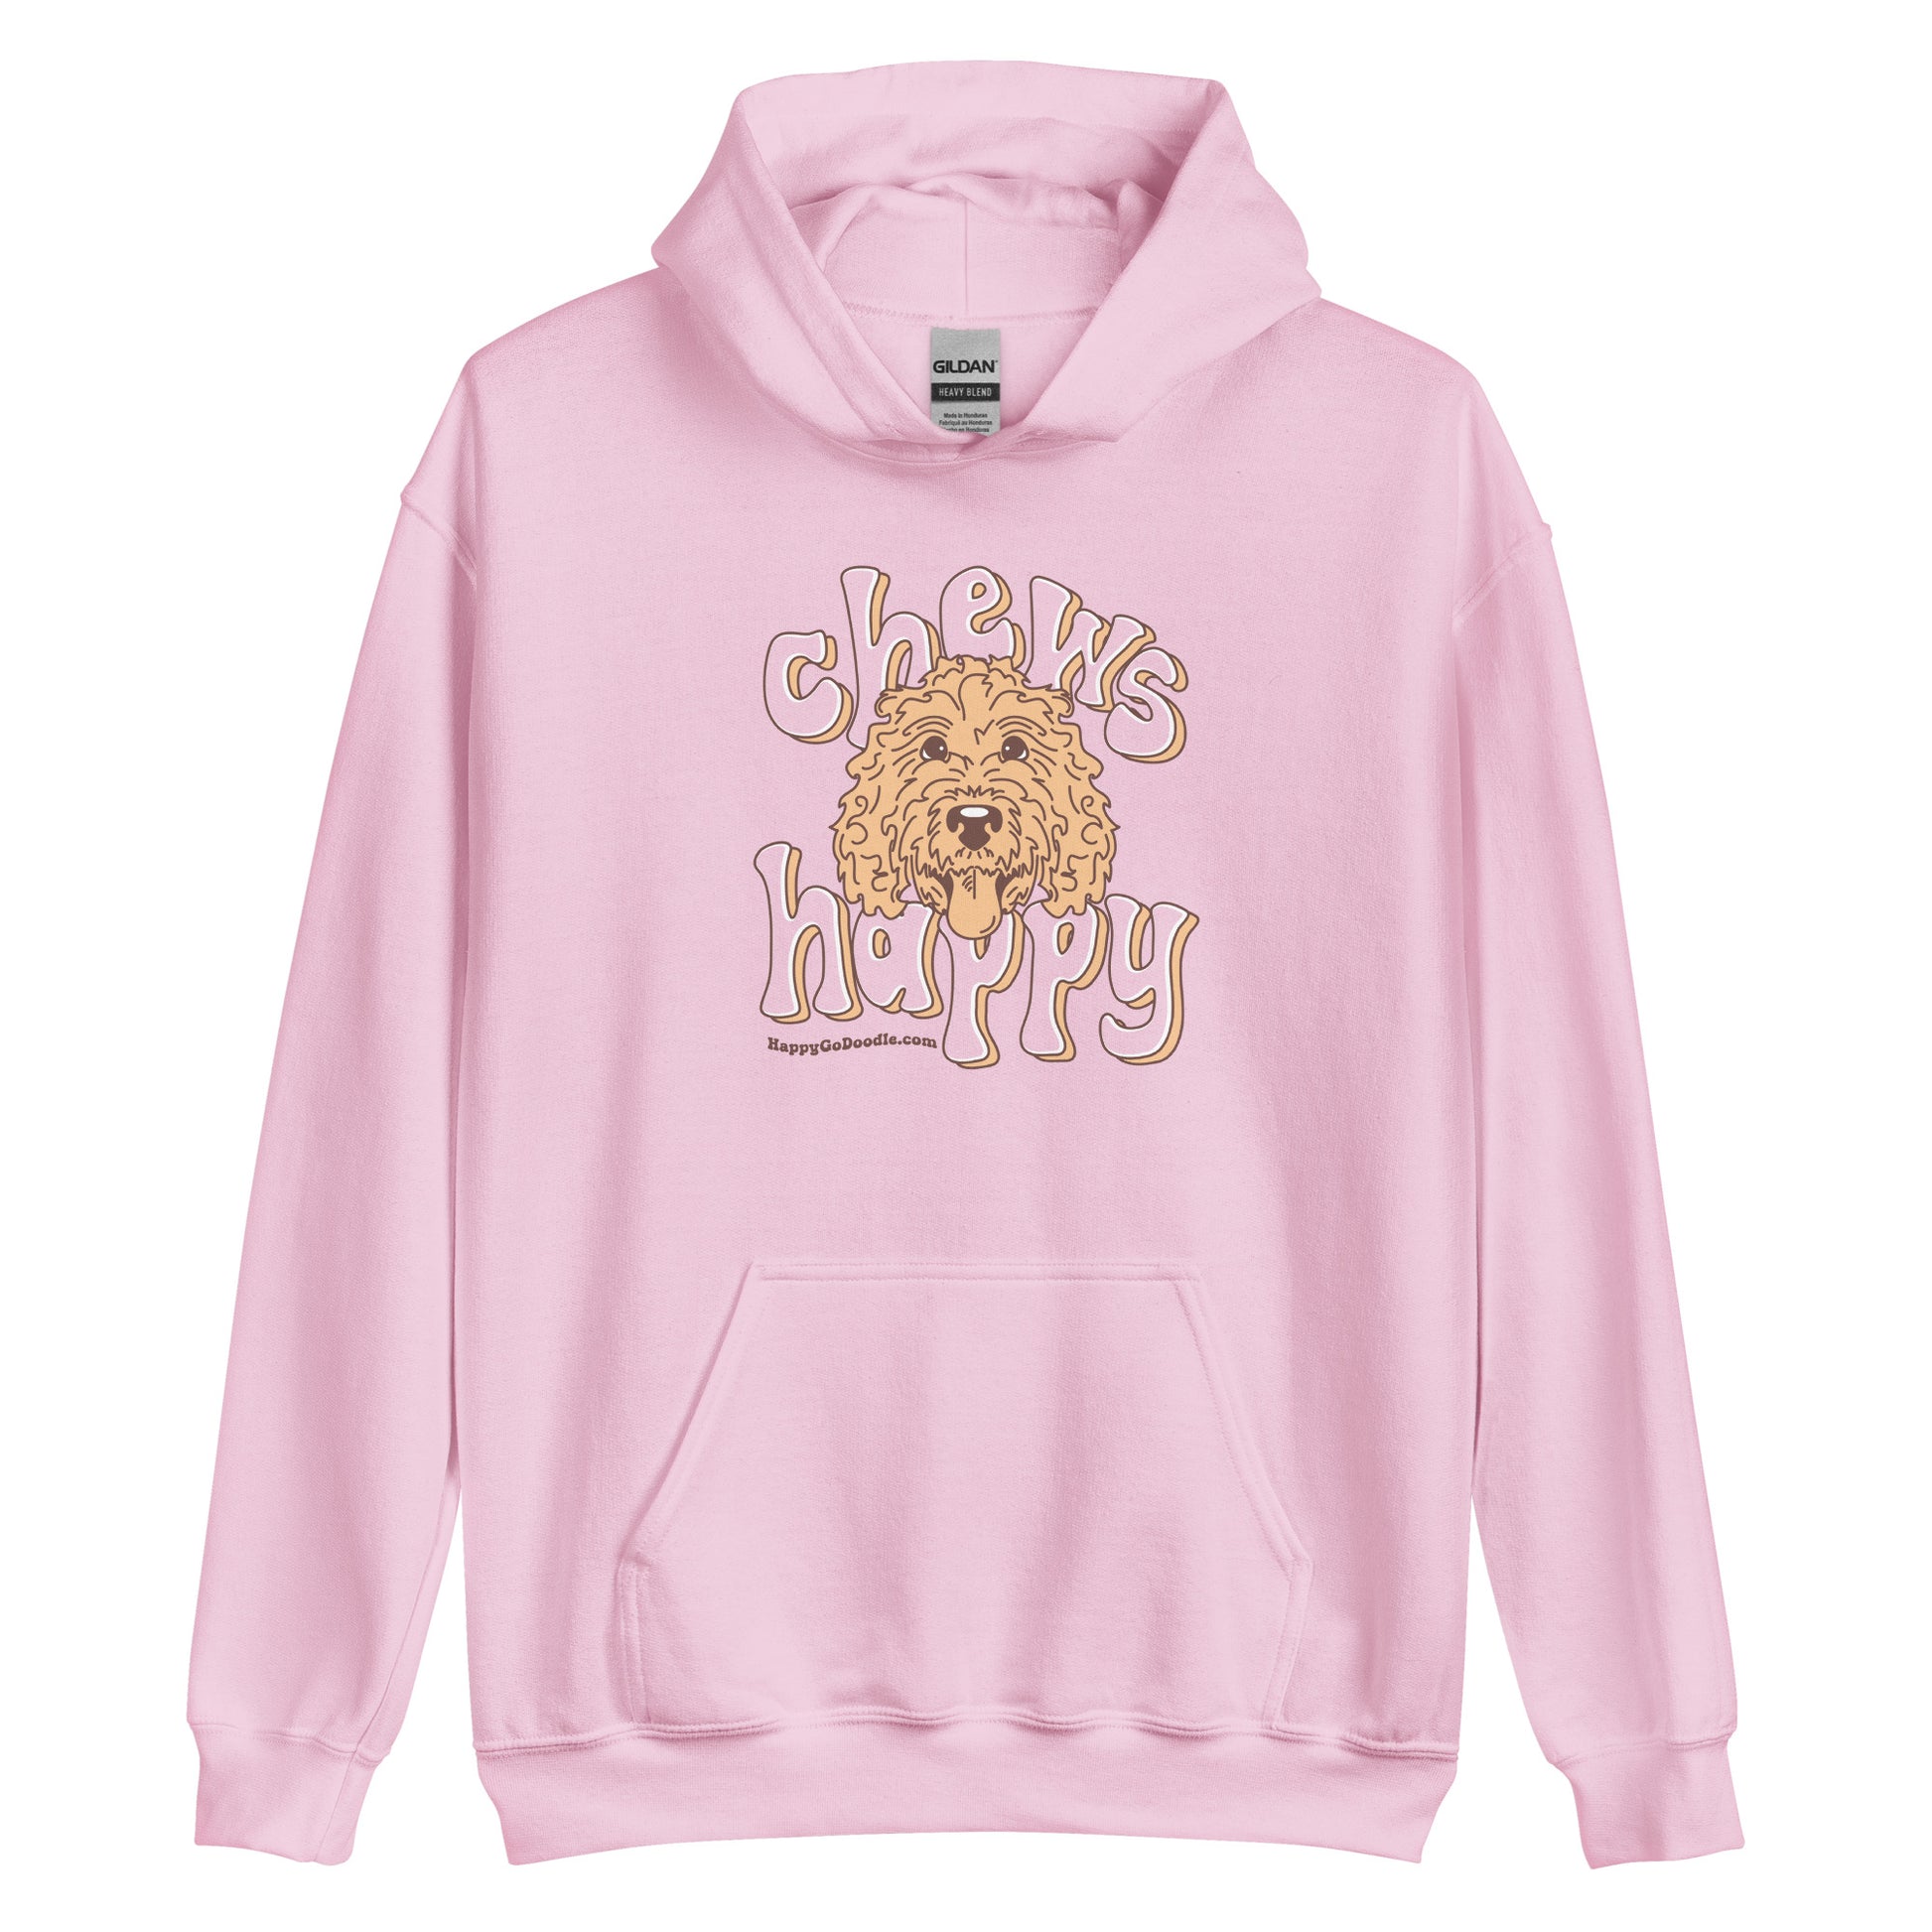 Goldendoodle hoodie with Goldendoodle face and words "Chews Happy" in light pink color